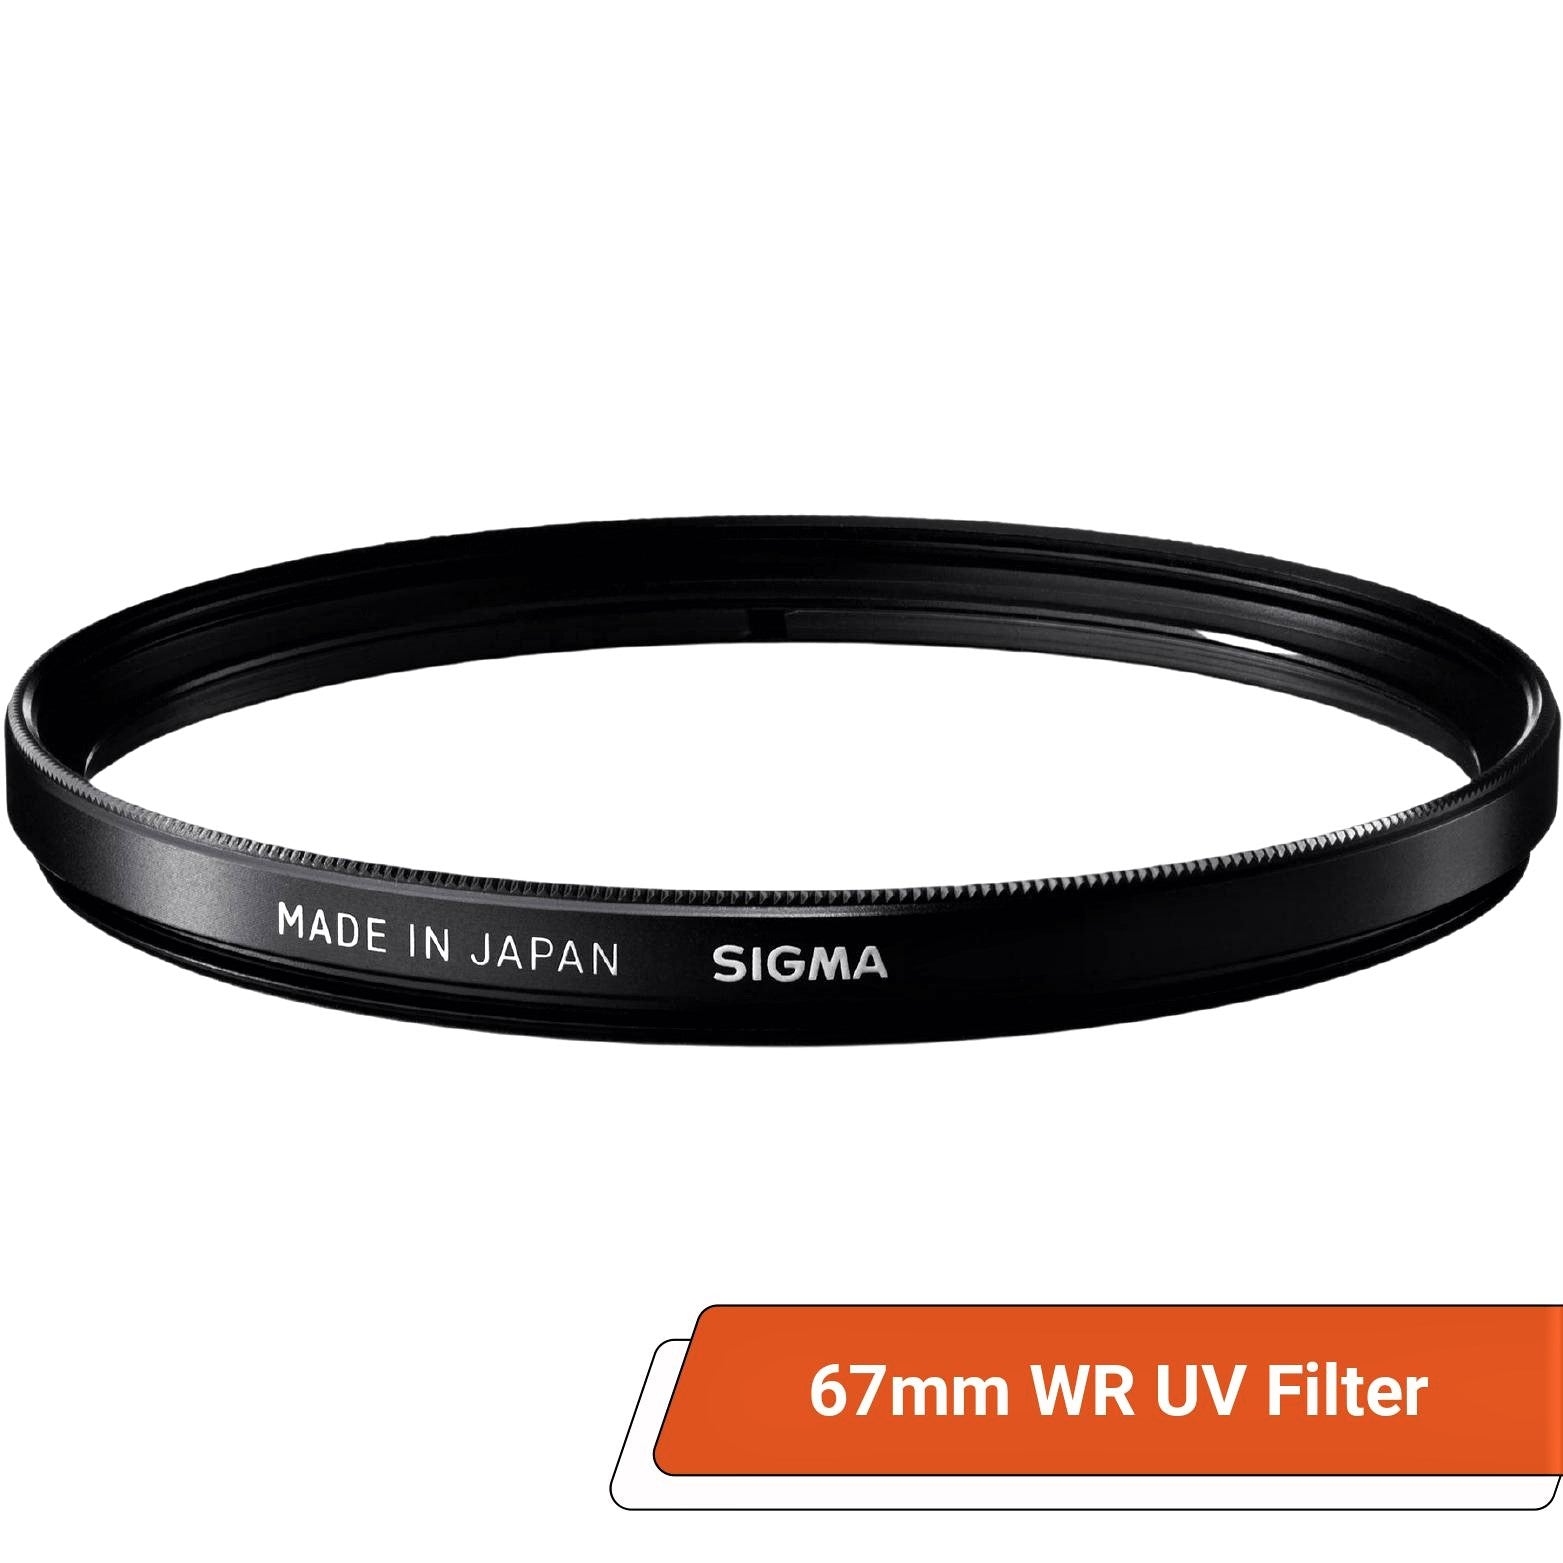 Sigma 67mm WR (Water Repellent) UV Filter